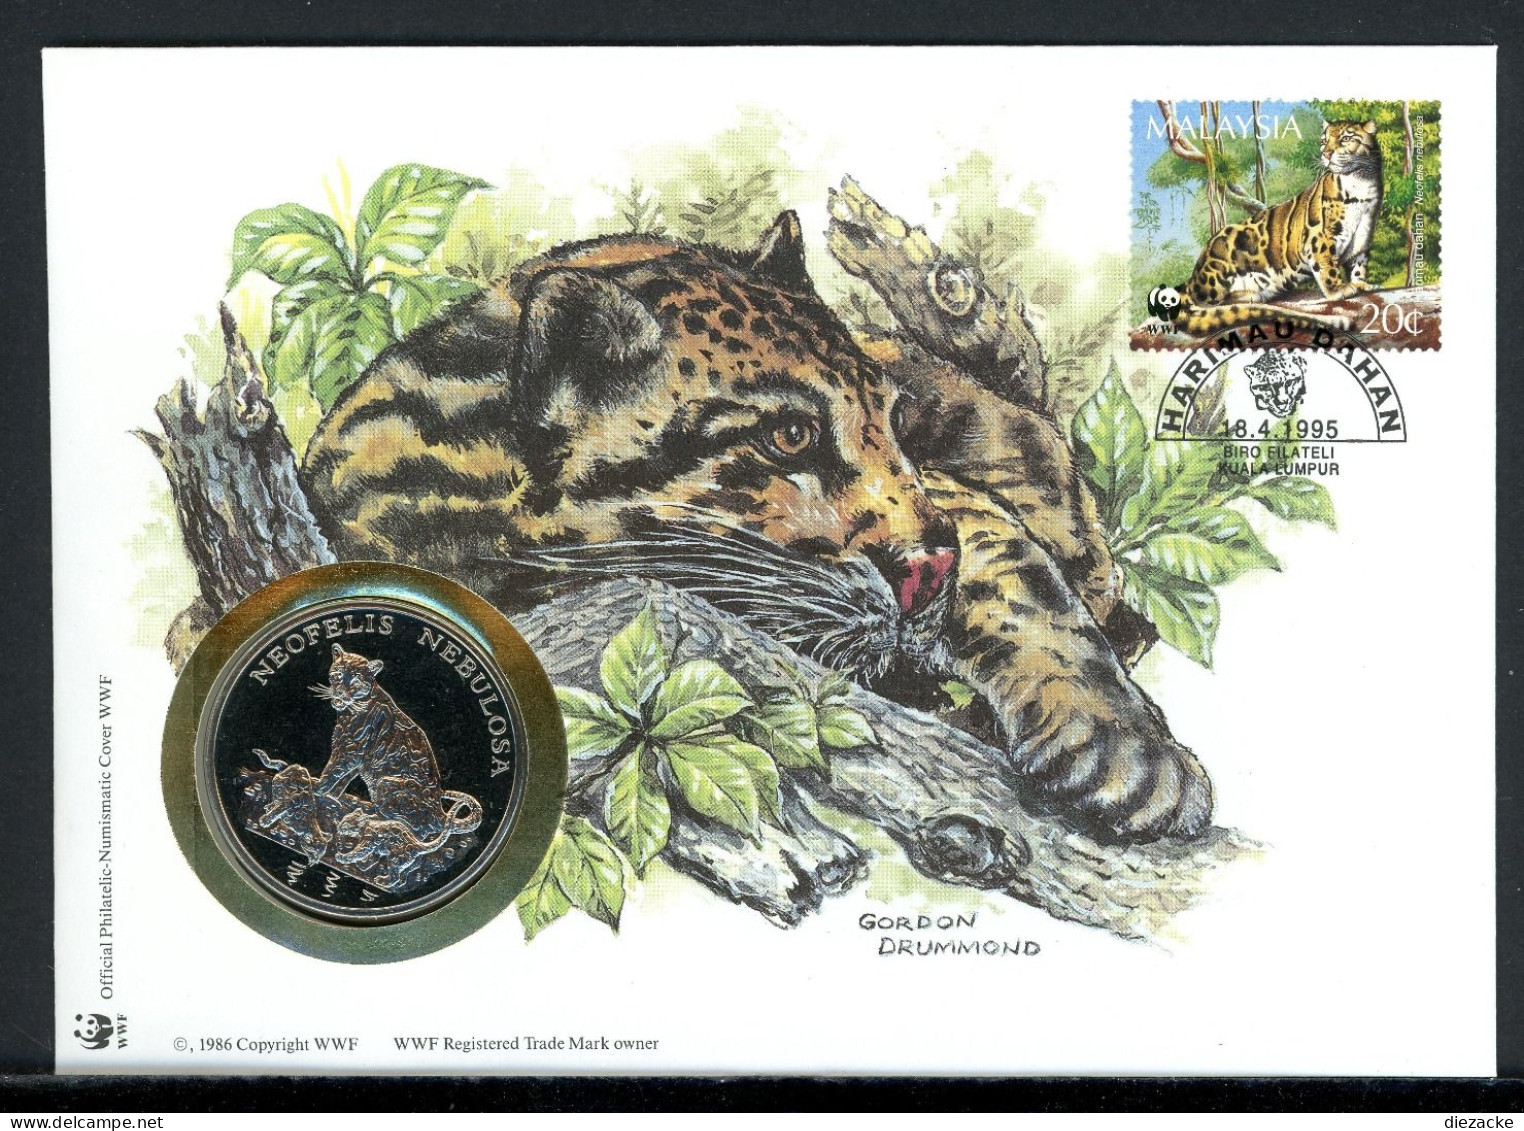 Malaysia 1995 Numisbrief Medaille Nebelparder 30 Jahre WWF, CuNi PP (MD844 - Zonder Classificatie